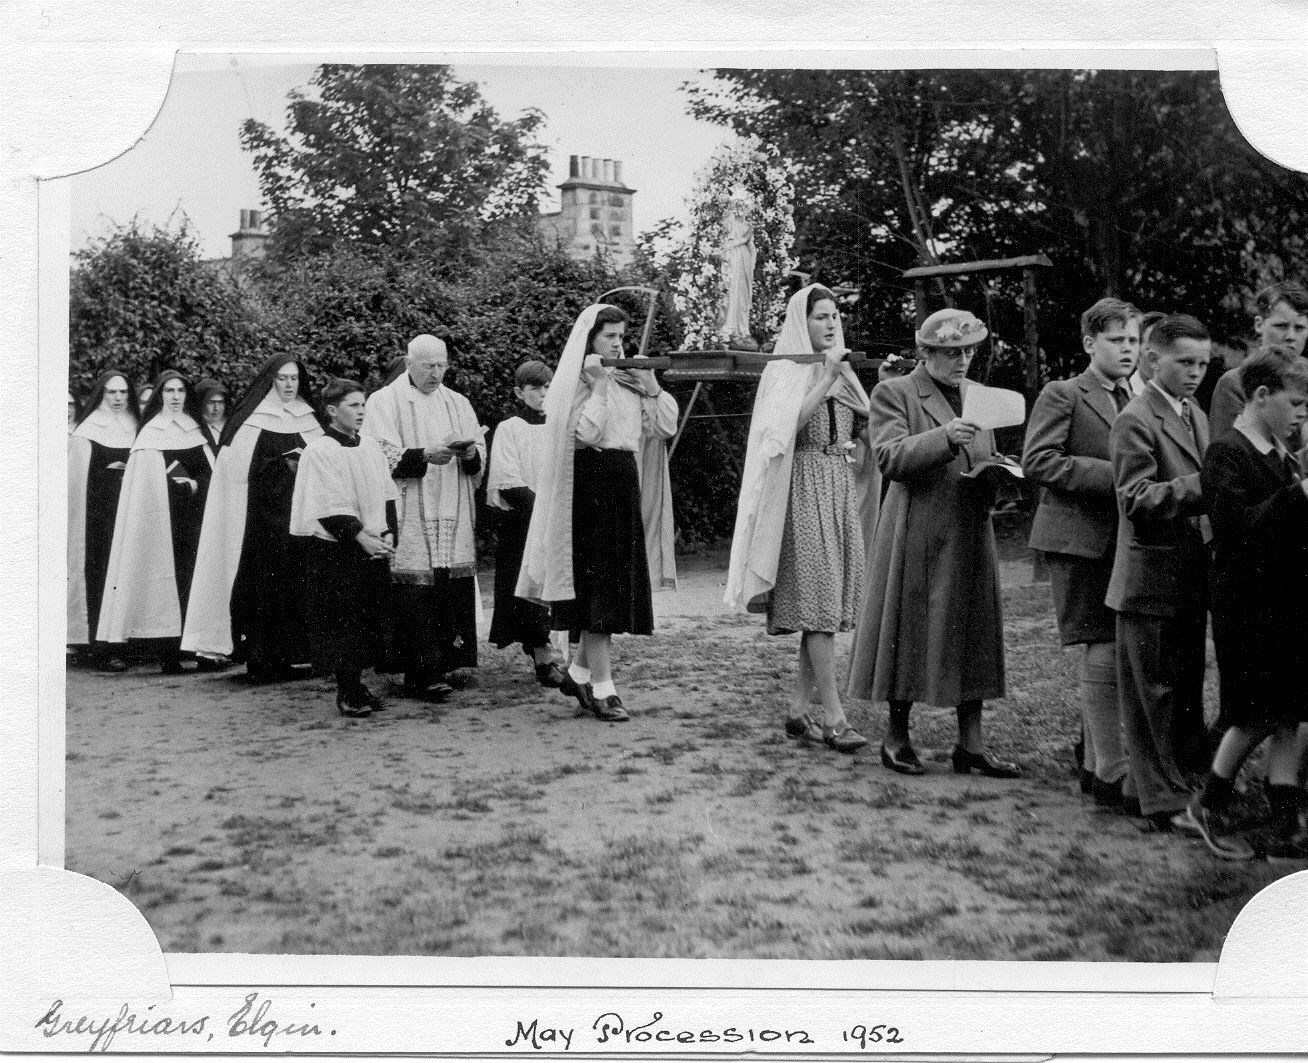 The Sisters of Mercy having a Marian procession in the convent garden in 1952.